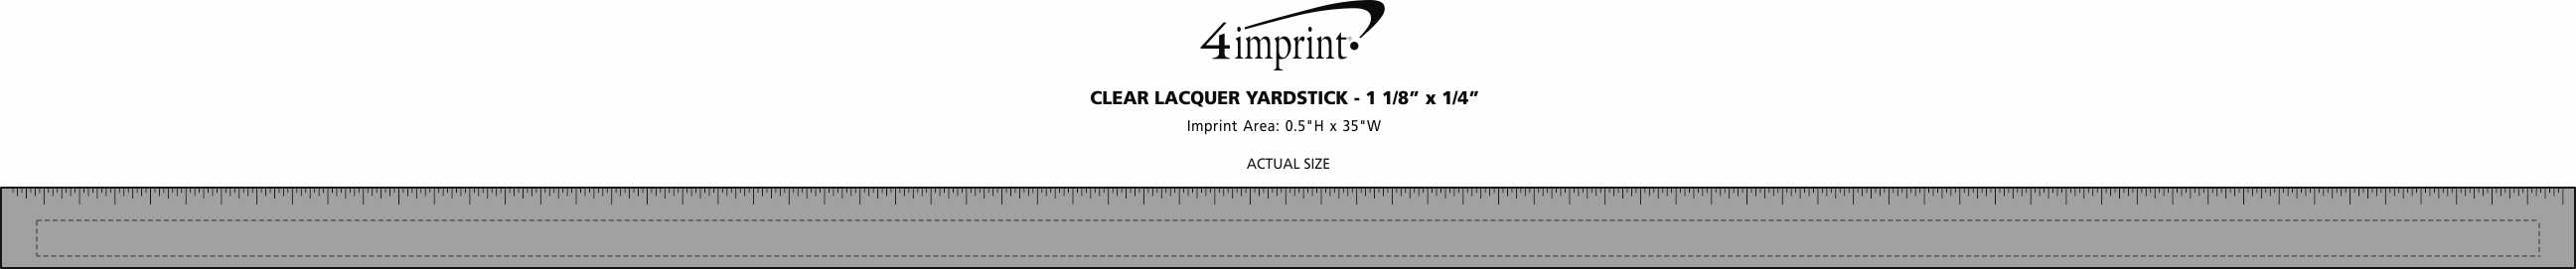 Imprint Area of Clear Lacquer Yardstick - 1-1/8" x 1/4"